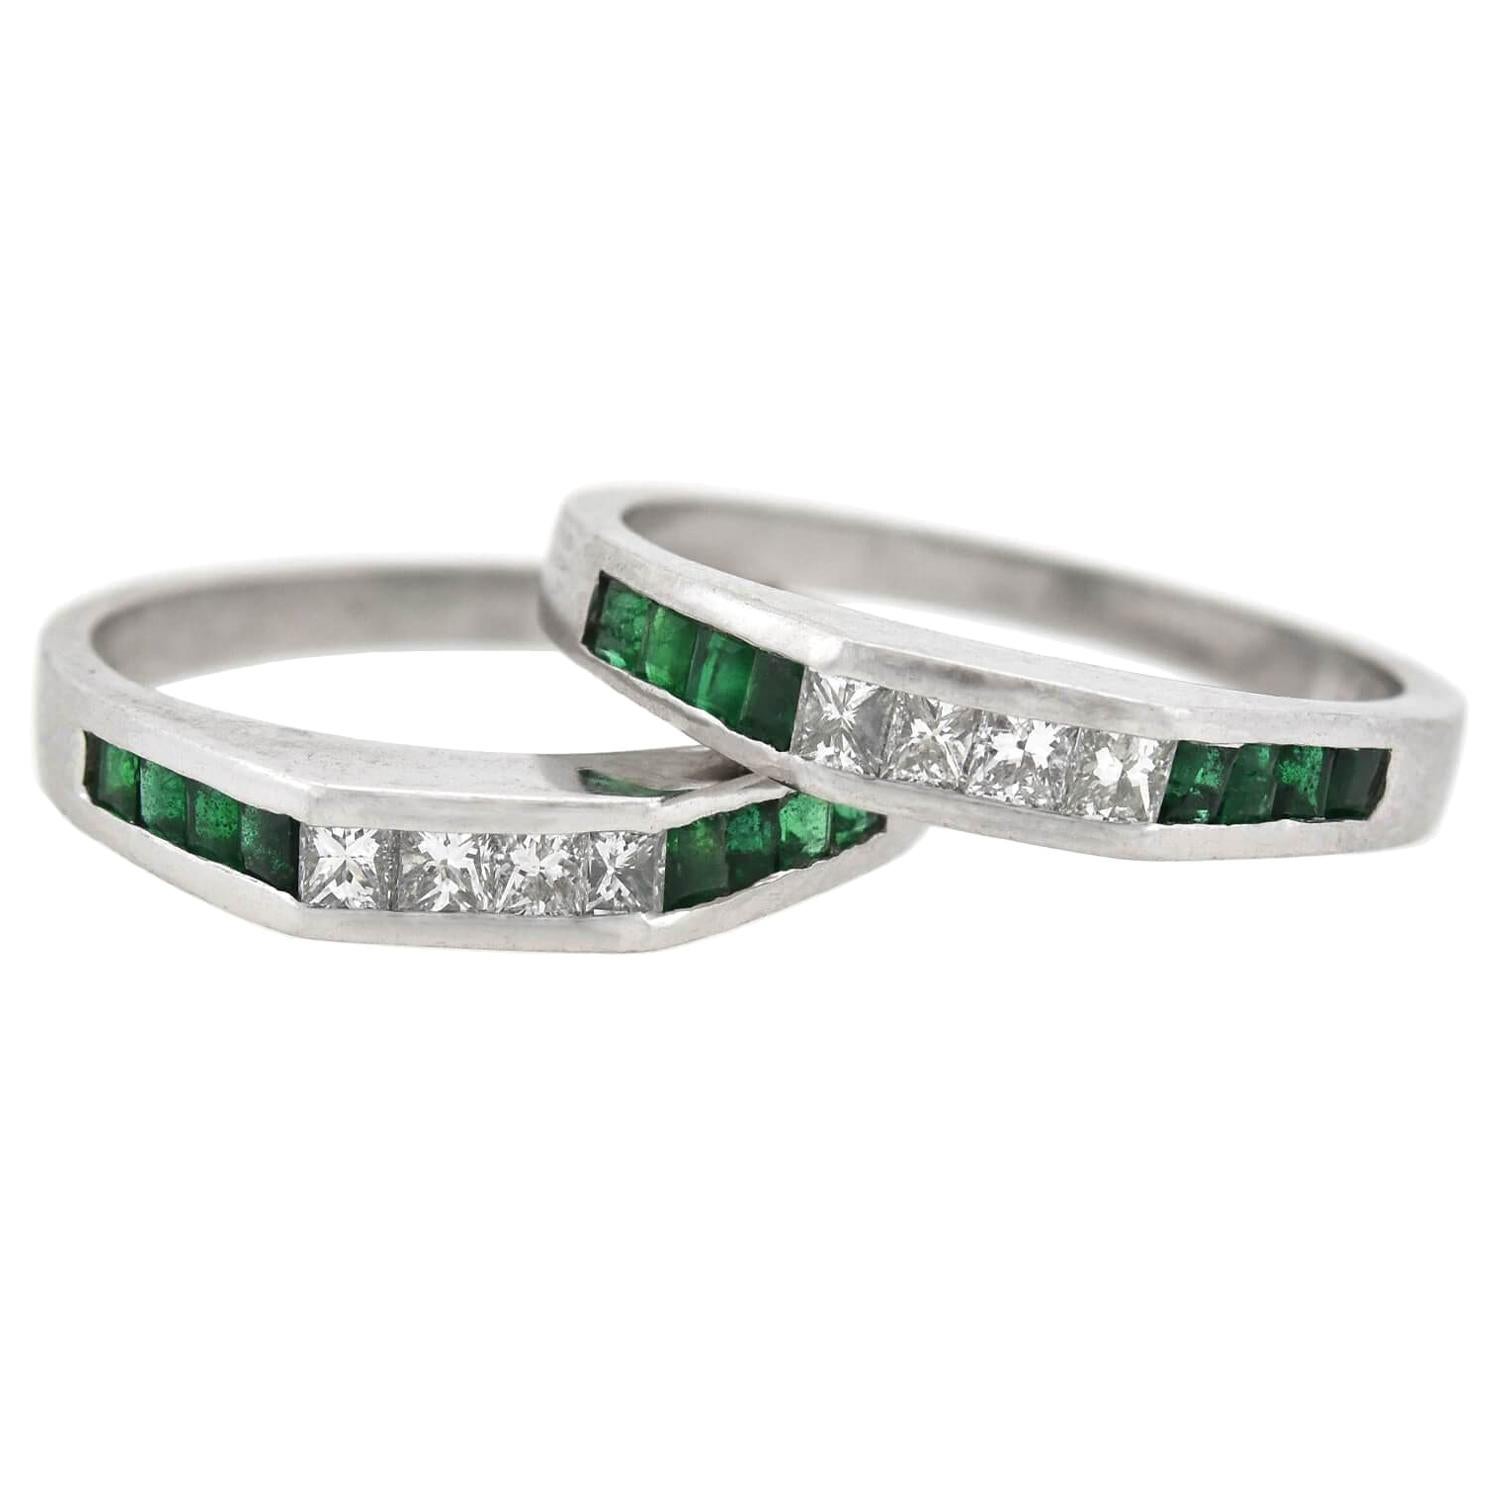 Vintage Emerald and Diamond Squared Band Ring Set